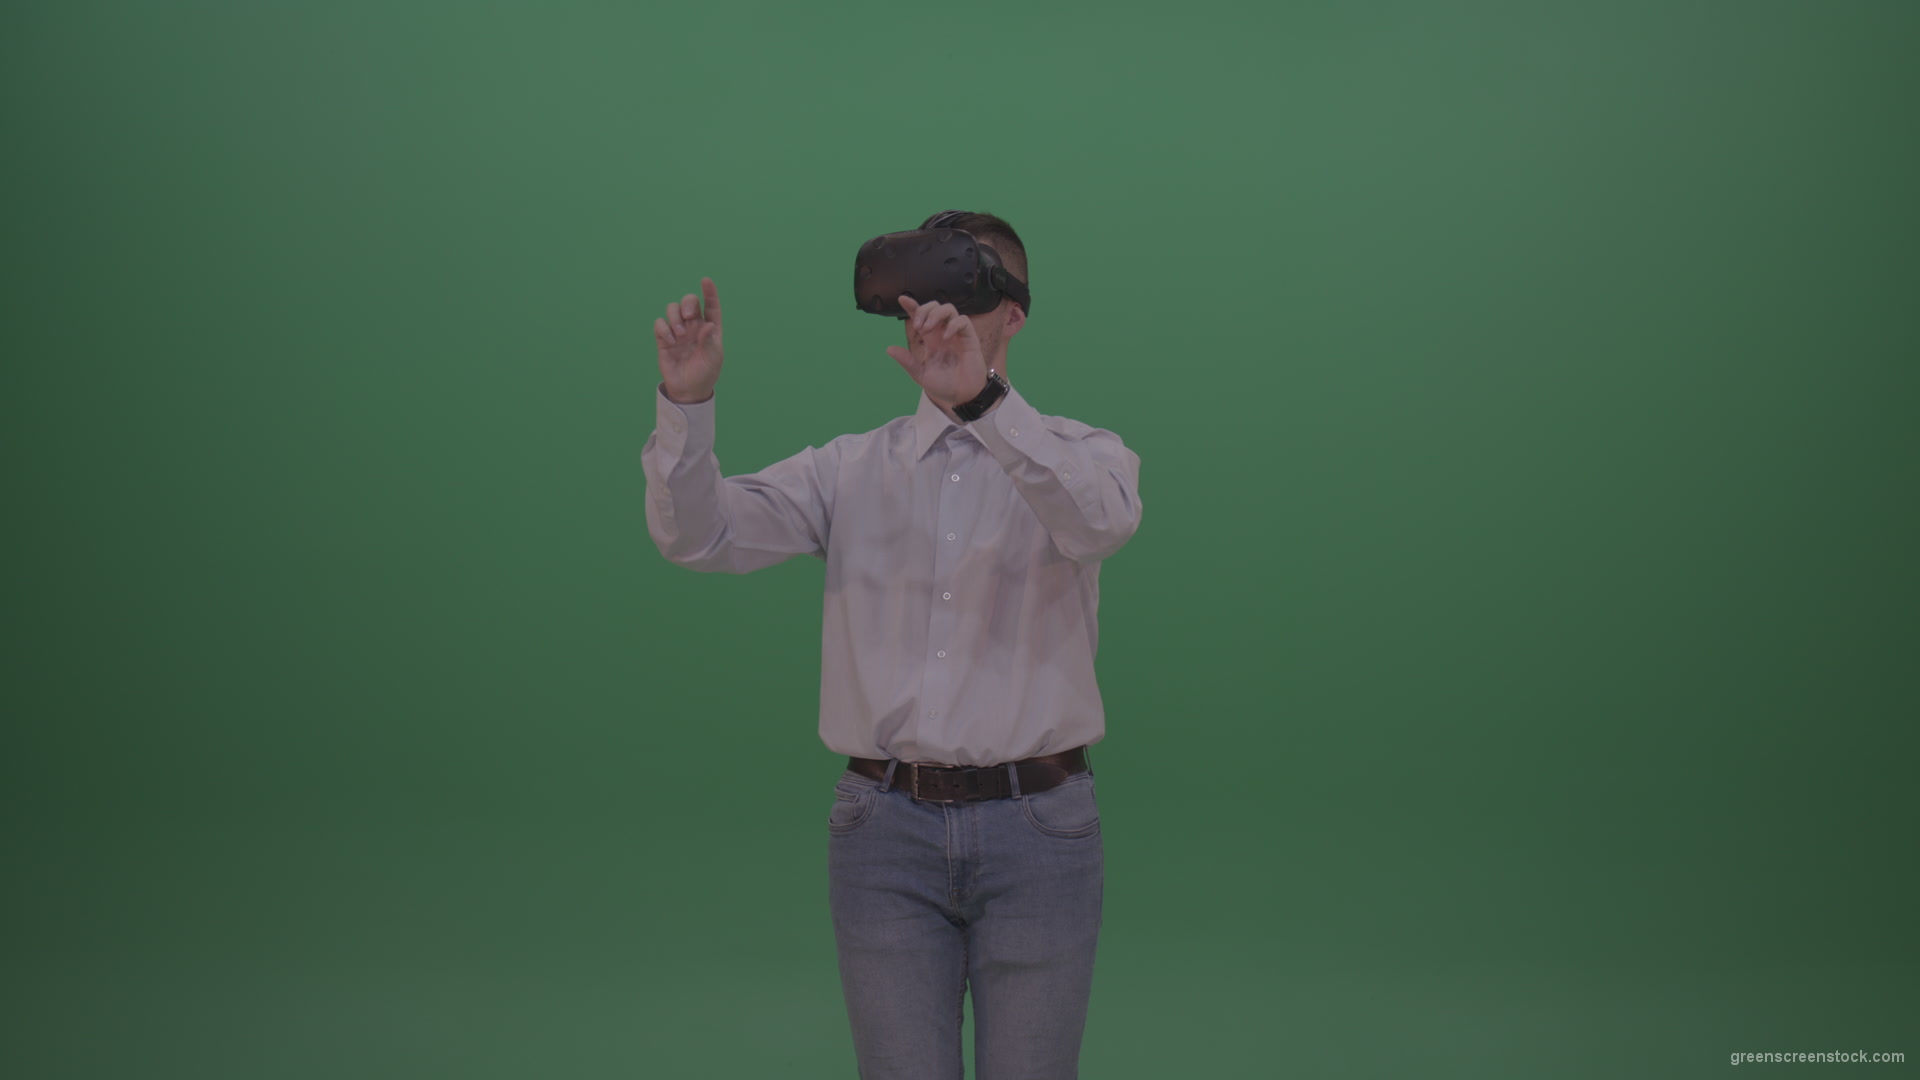 Young_Handsome_Man_With_Black_Hair_Wearing_White_Shirt_Using_Virtual_Glasses_Clicking_Touch_Pad_On_Green_Screen_Background_Wall_006 Green Screen Stock